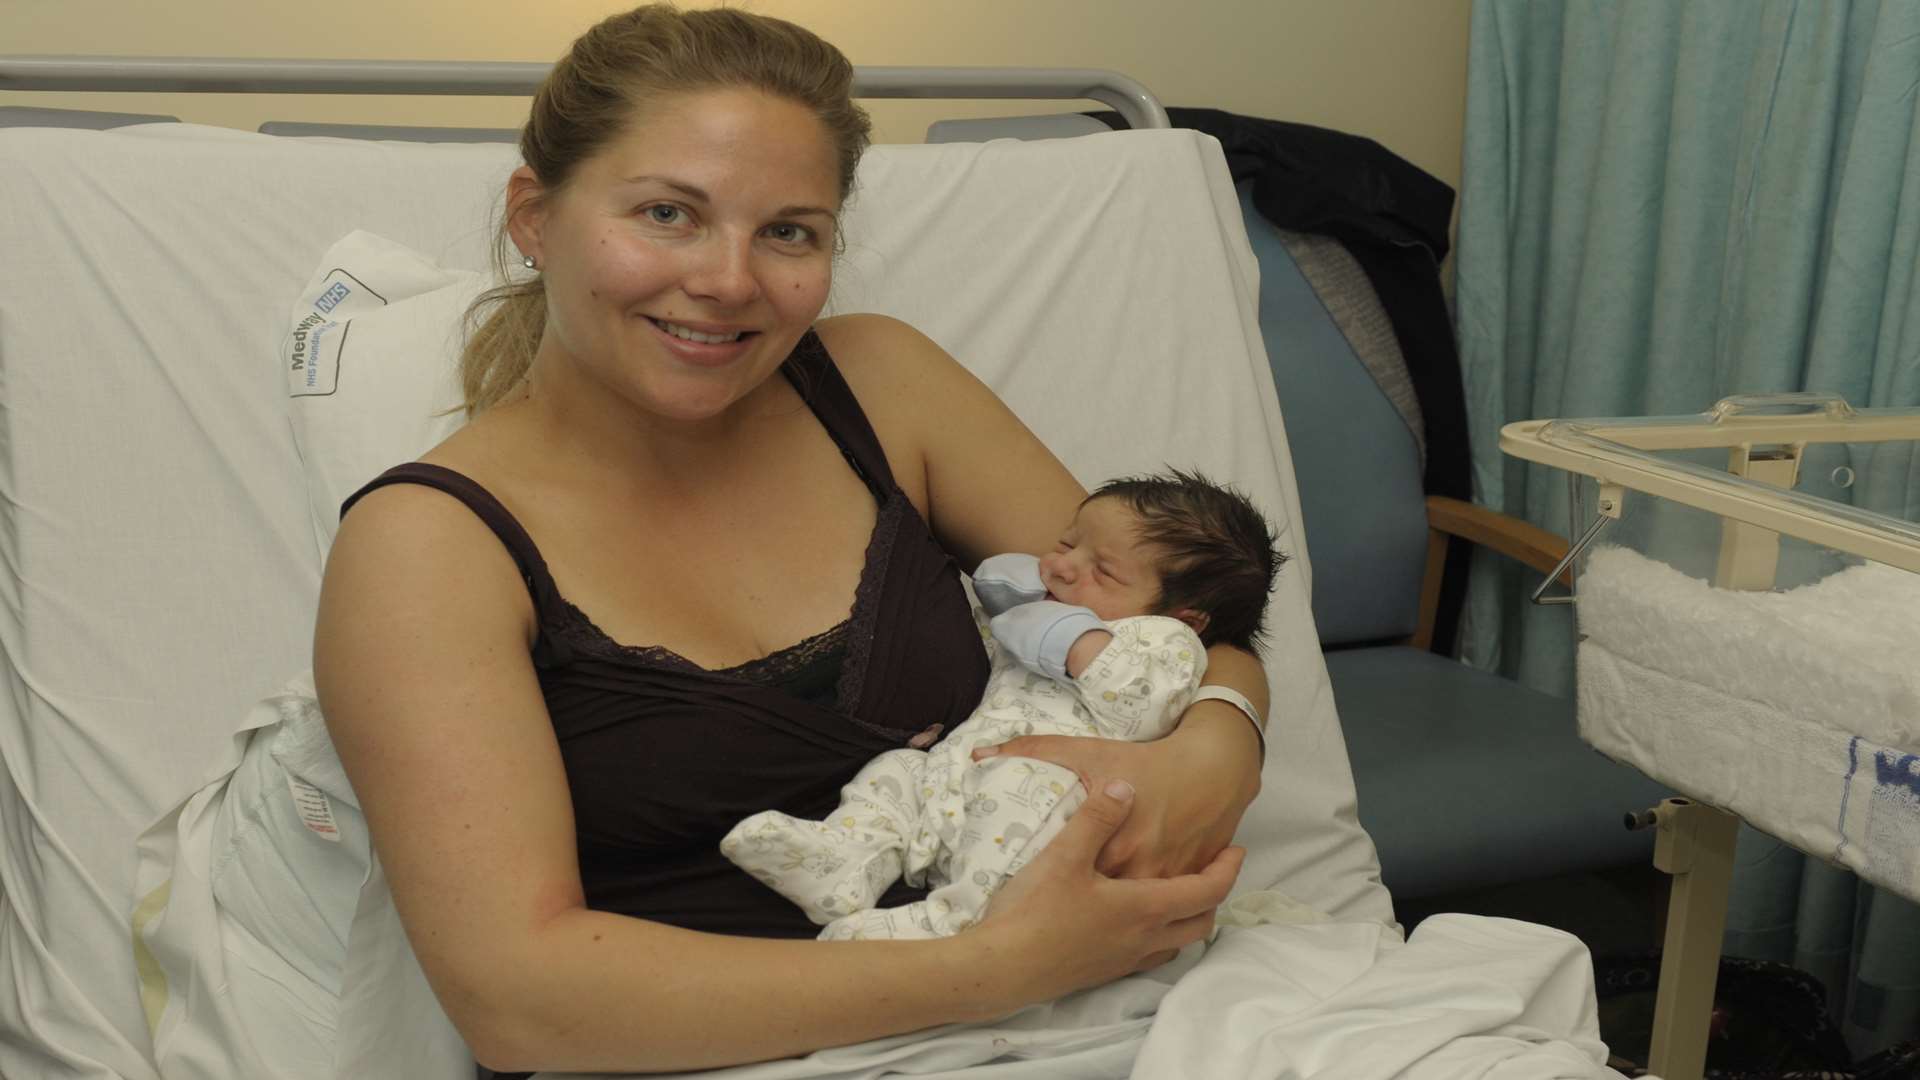 Sally Thomas with Harry who was born at 4:15pm, weighing 7lb 6oz.